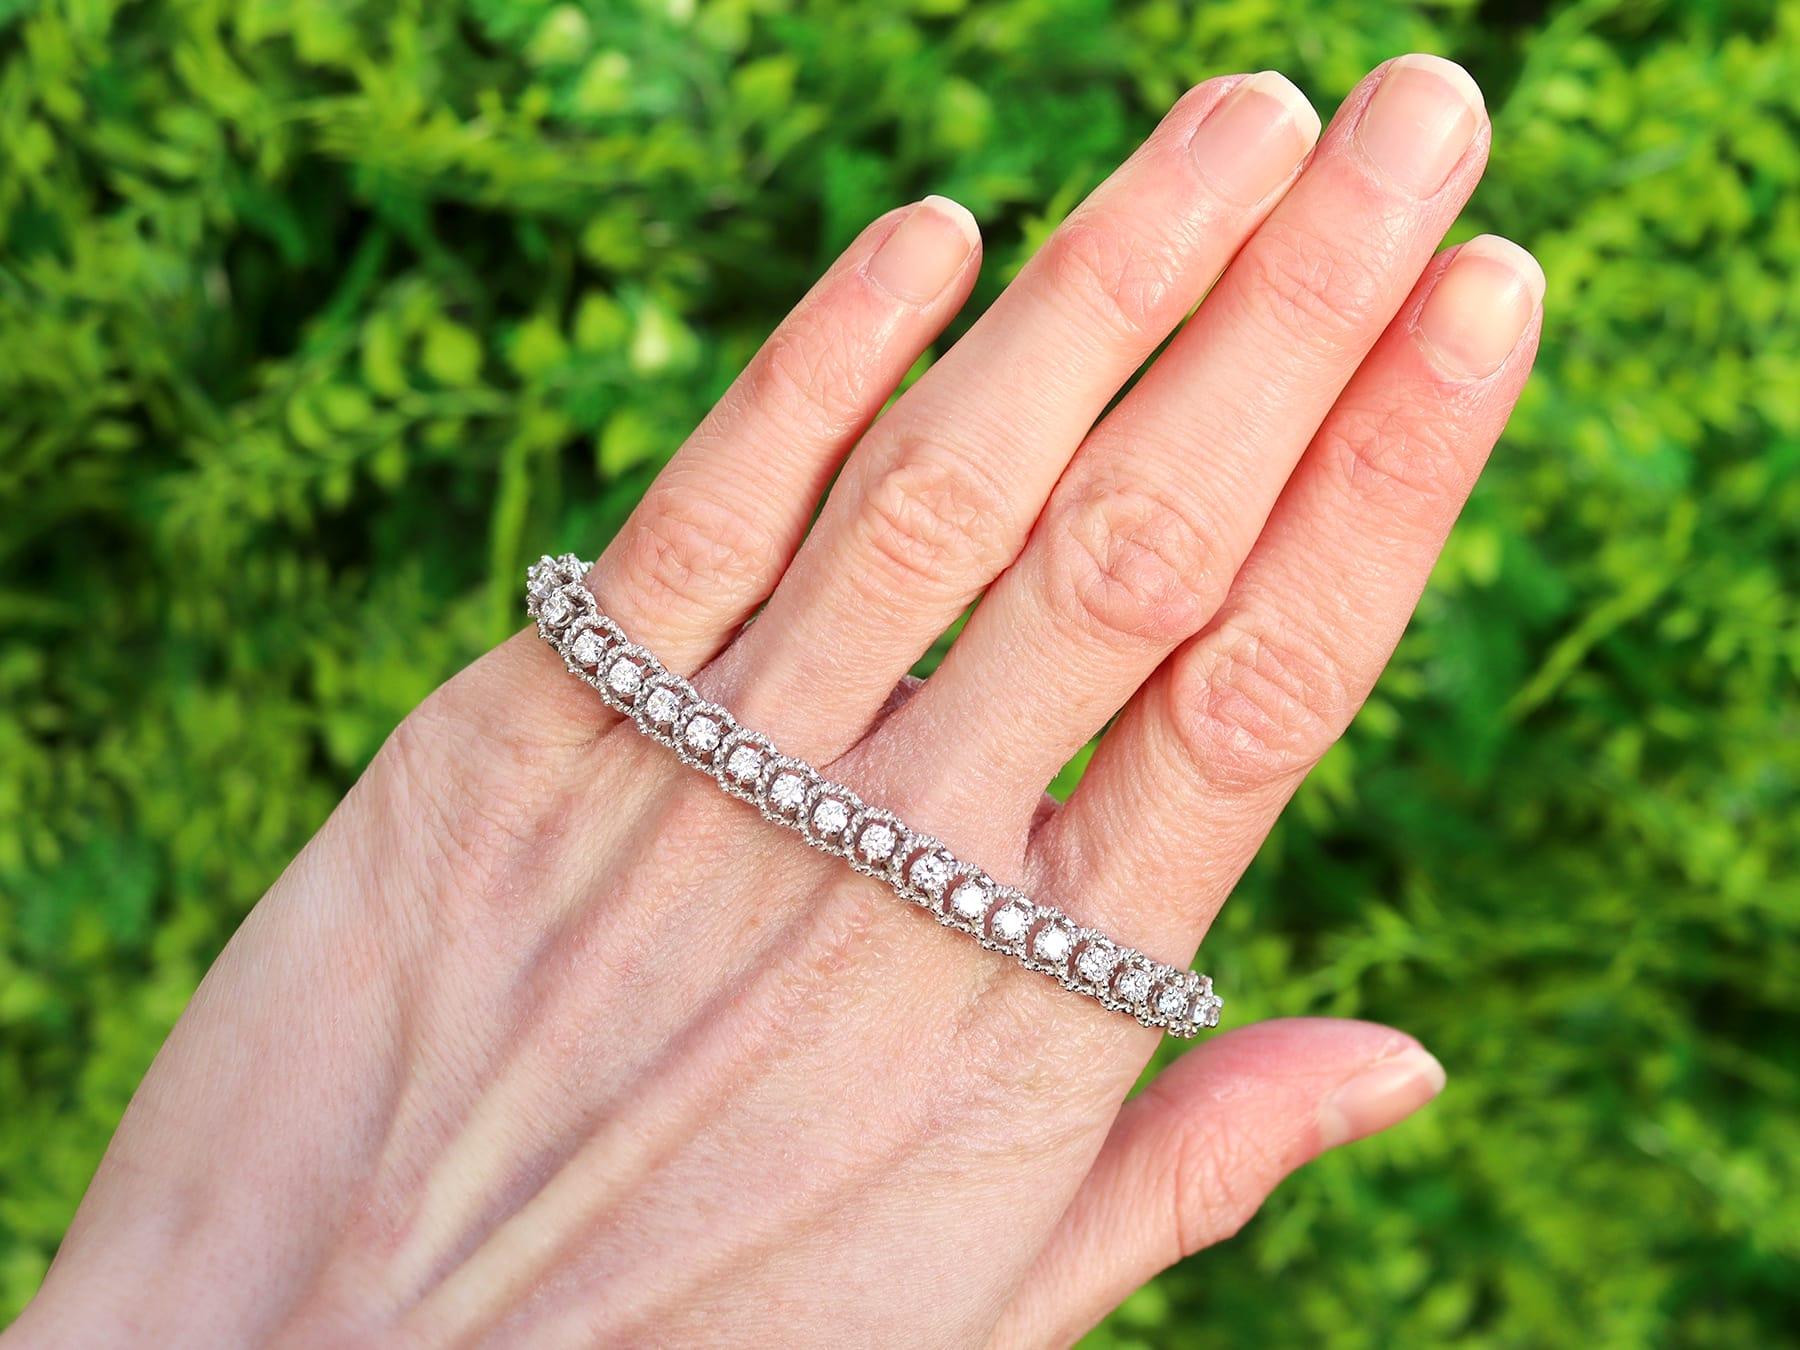 A fine and impressive vintage French 2.92 carat diamond and 18 carat white gold rope twist bracelet; part of our diverse diamond bracelet collections

This fine and impressive vintage 1980's diamond bracelet has been crafted in 18 ct white